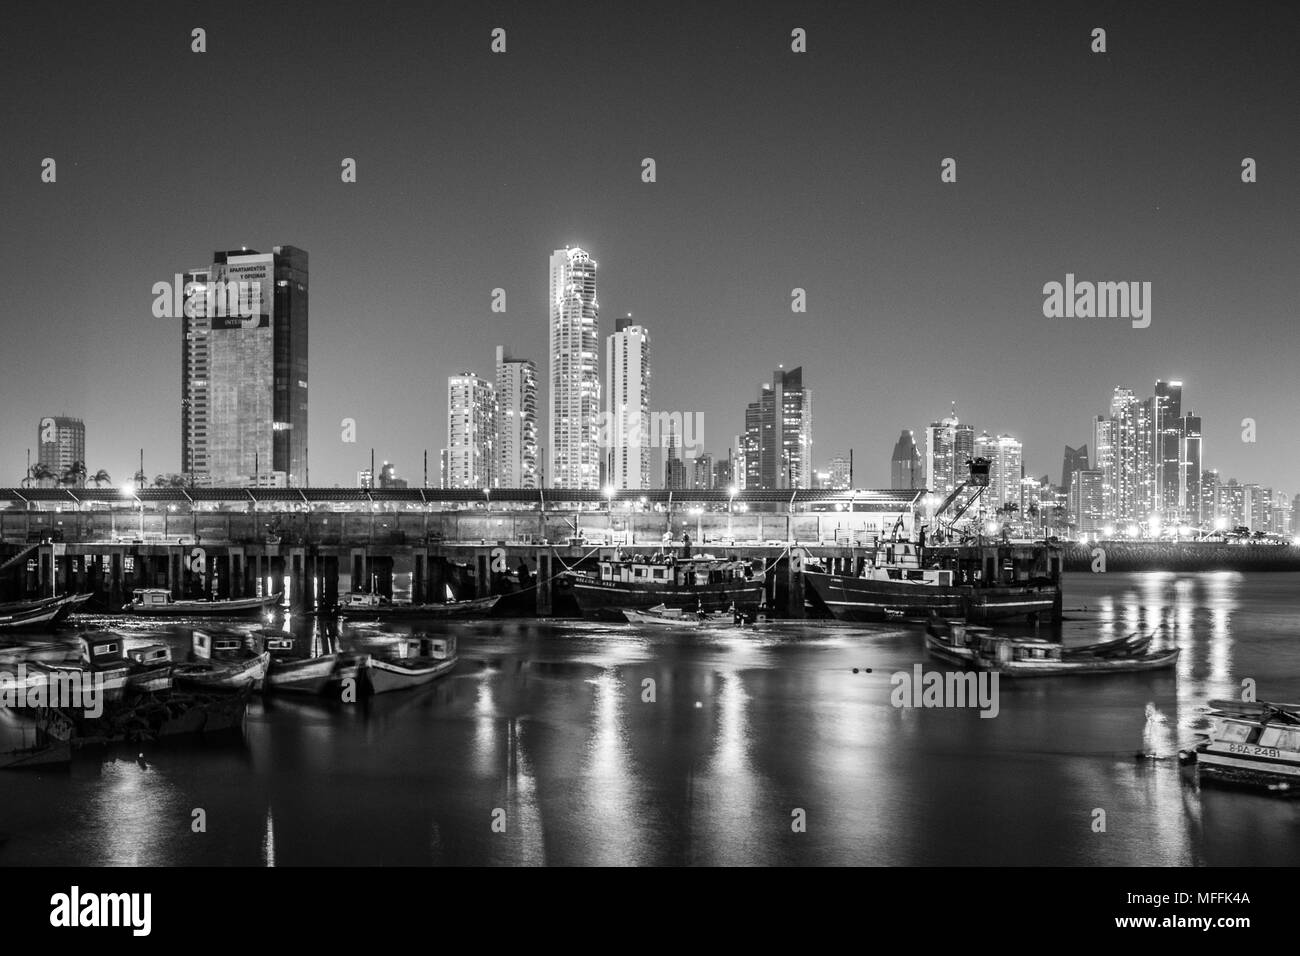 boats and city skyline at night -  cityscape of Panama City  business district - illuminated skyscraper buildings Stock Photo